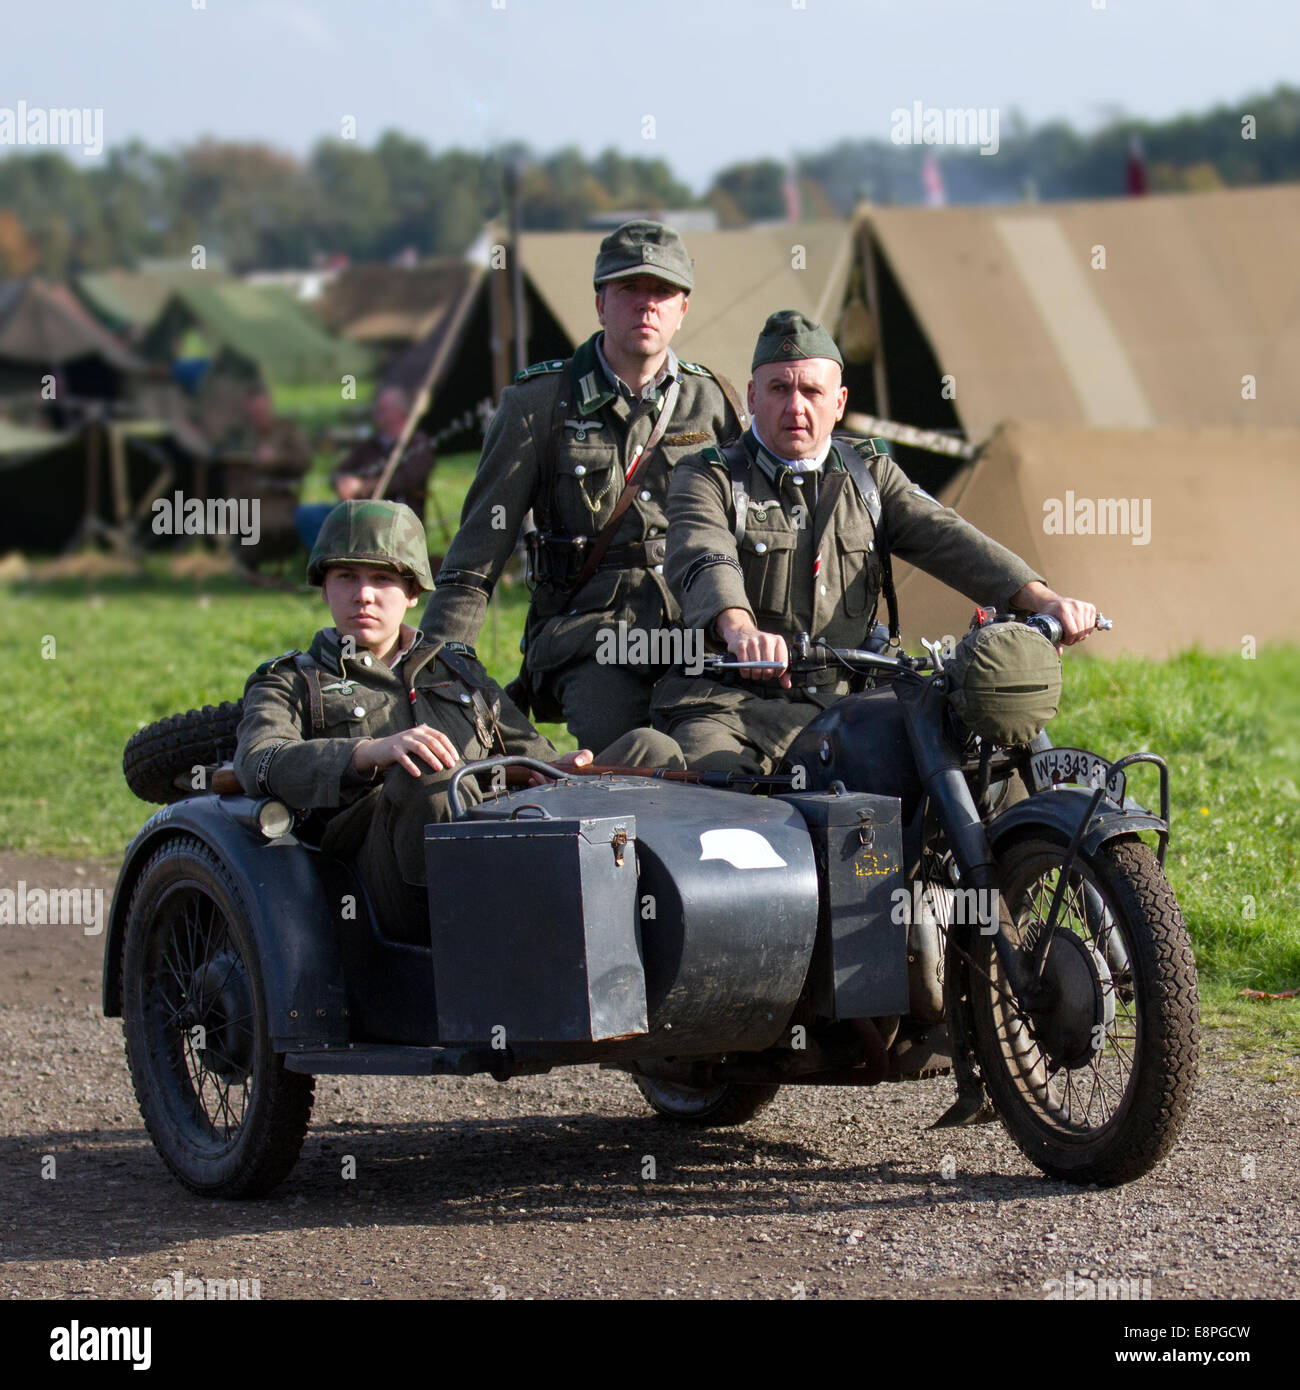 BMW R75 Vintage World War II, Second World War, WWII, WW2 motorcycle WH-343 633, with side-car, ridden by German soldiers at Pickering Wartime Weekend Stock Photo